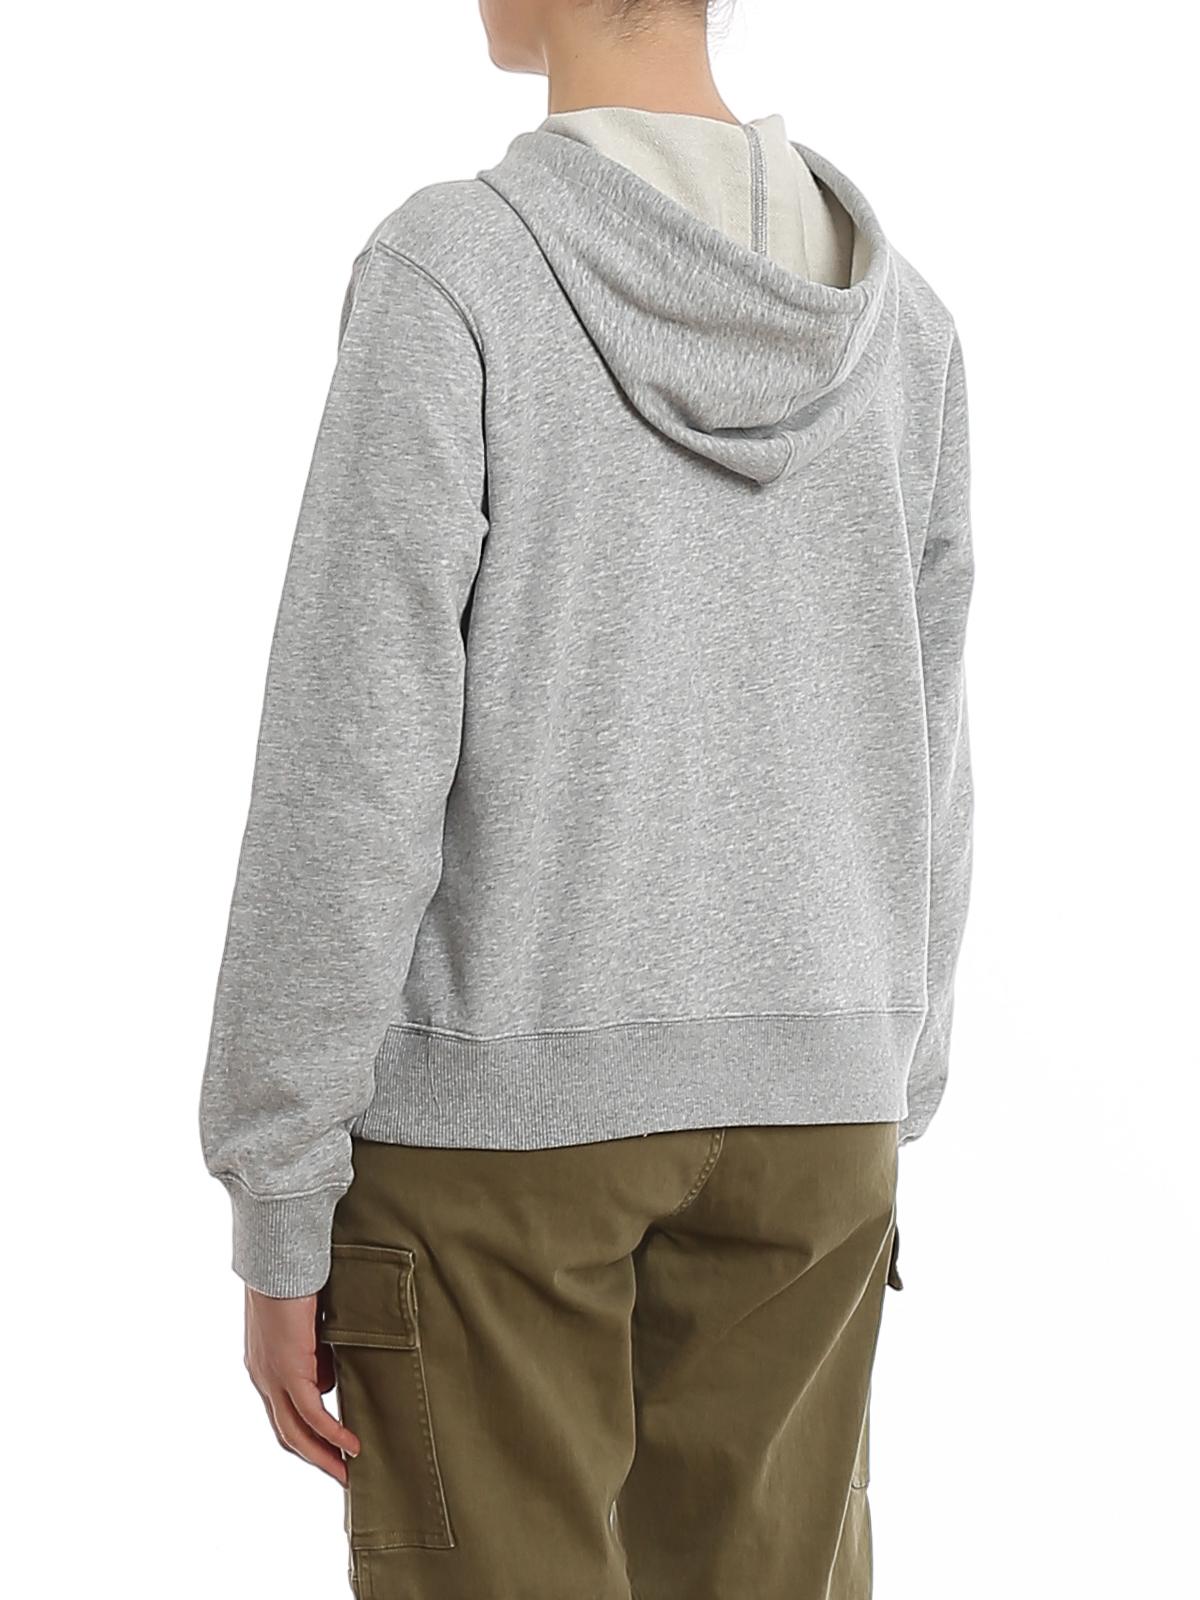 Michael Kors Cotton Relief Logo Hoodie in Grey (Gray) - Save 25% - Lyst